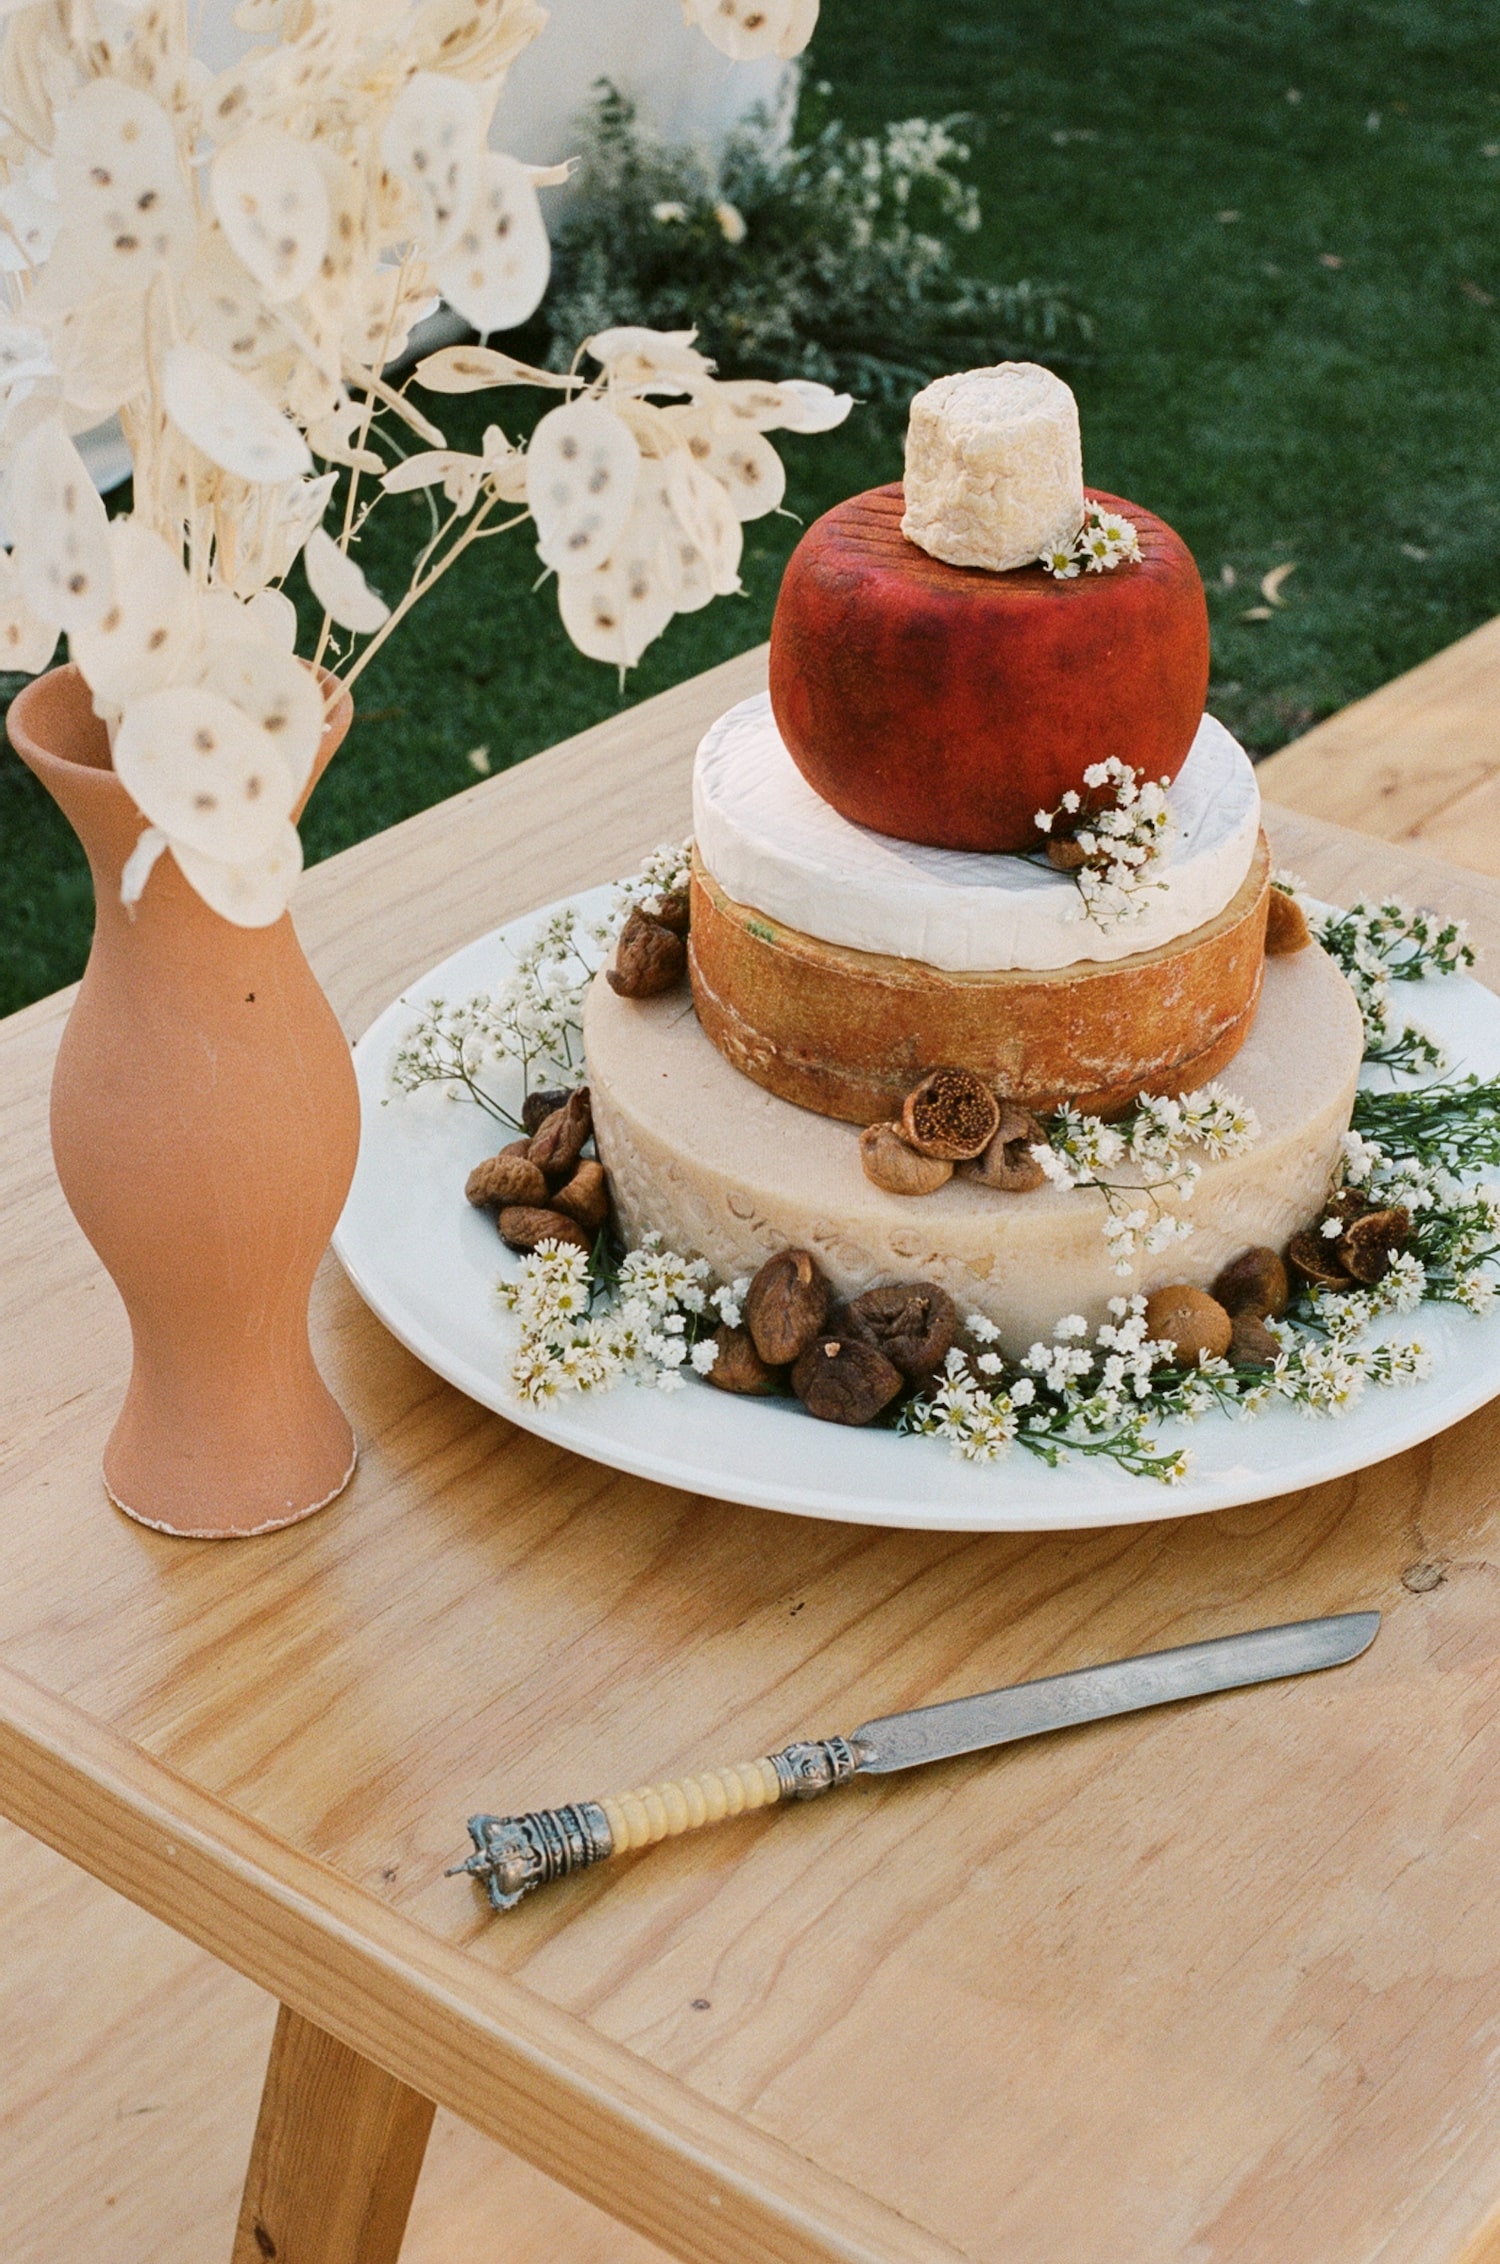 Wedding cake - a cake of stacked round cheeses